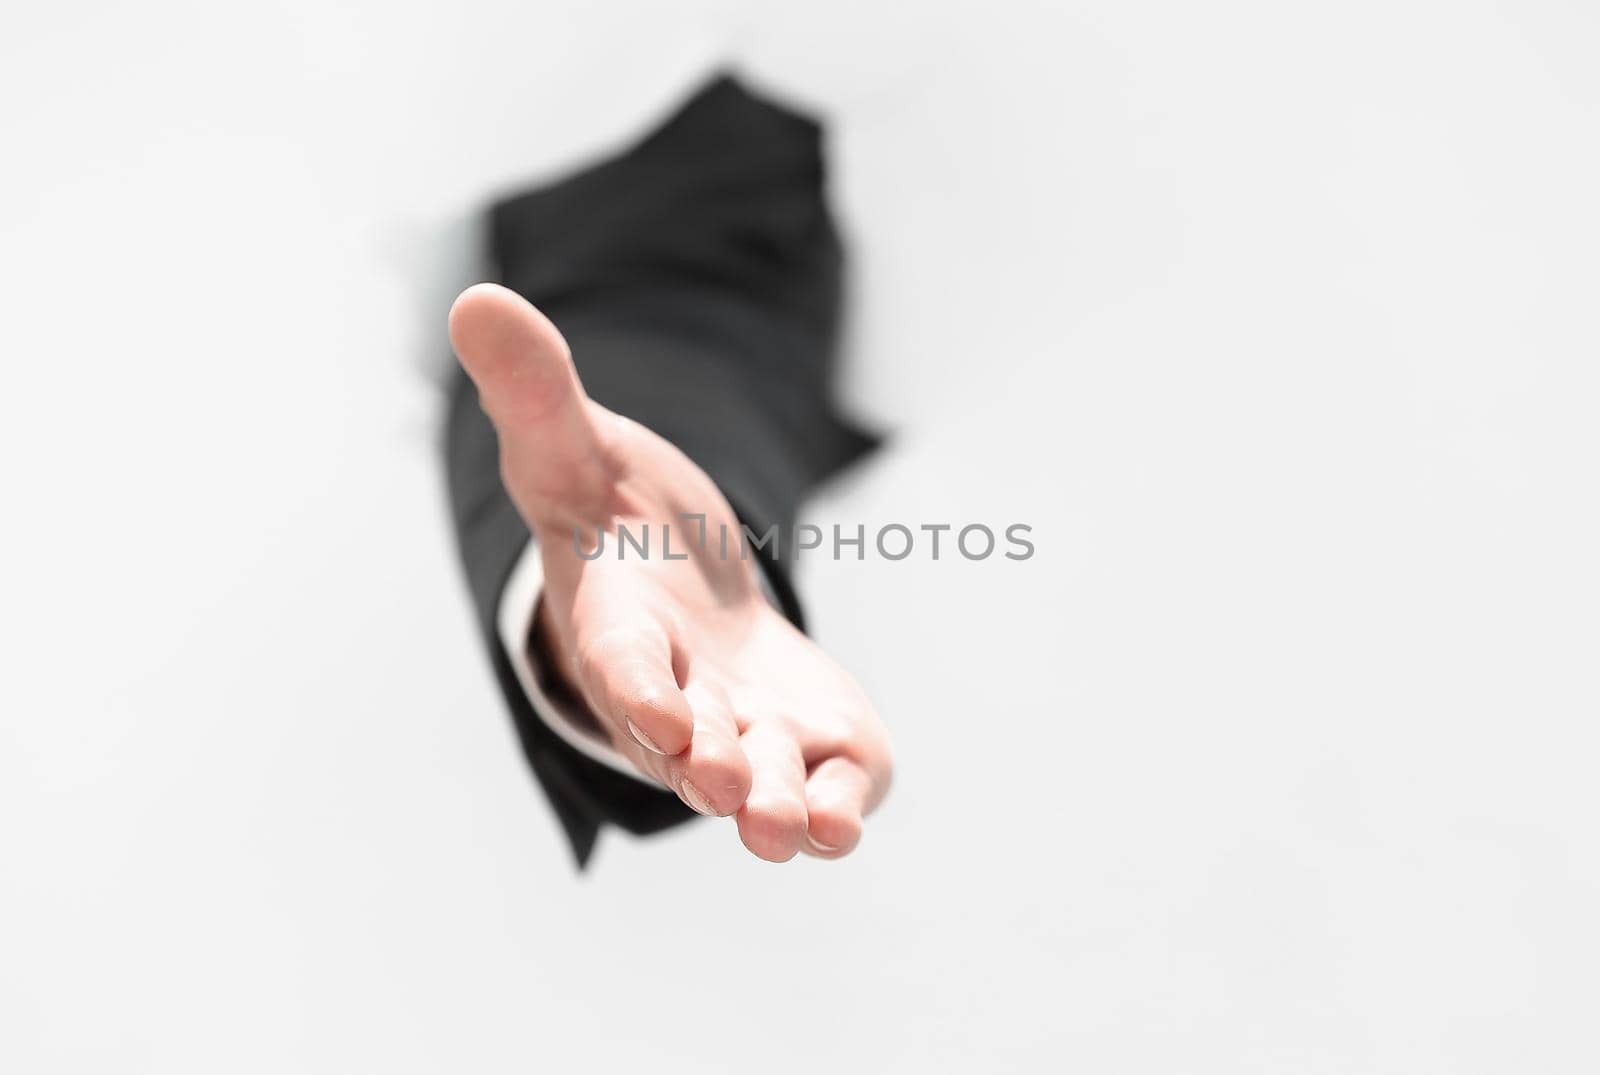 men holding out his hand for a handshake . photo with copy space